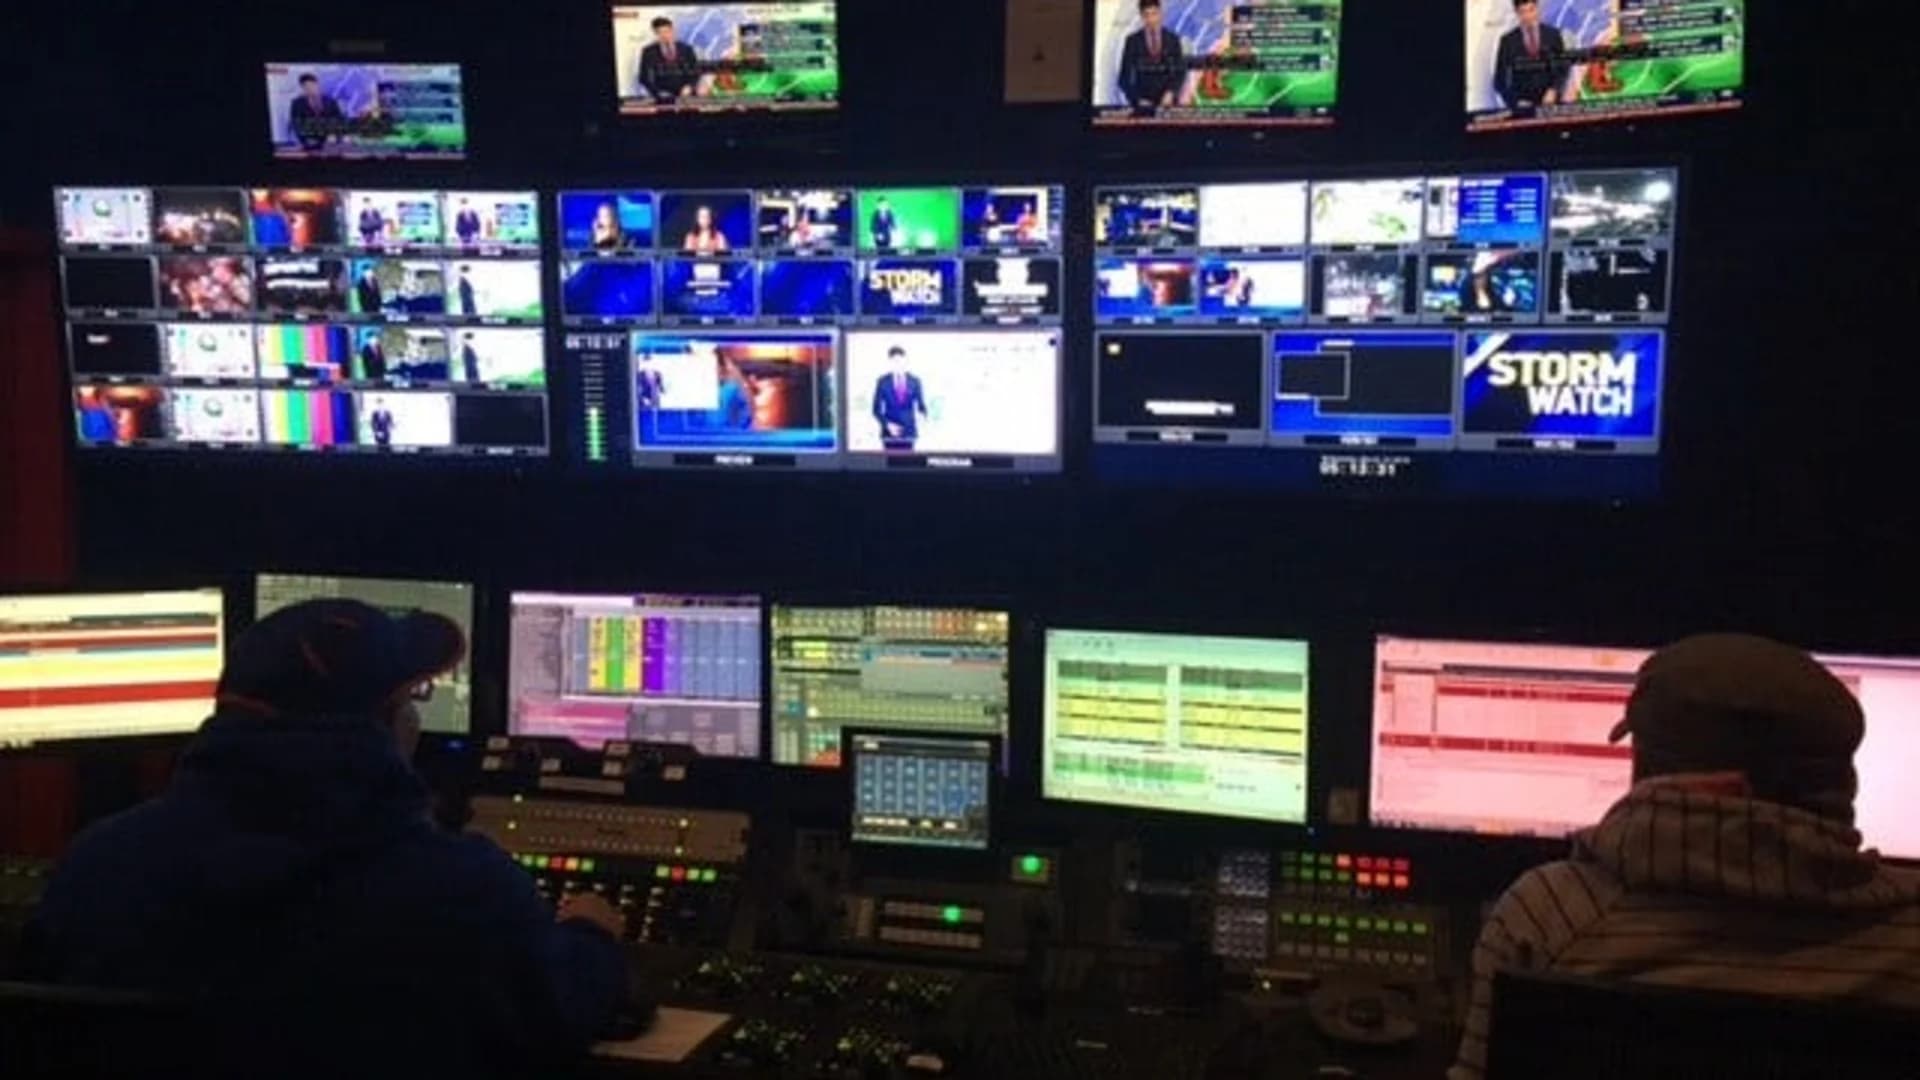 News 12 Behind the scenes weather photos